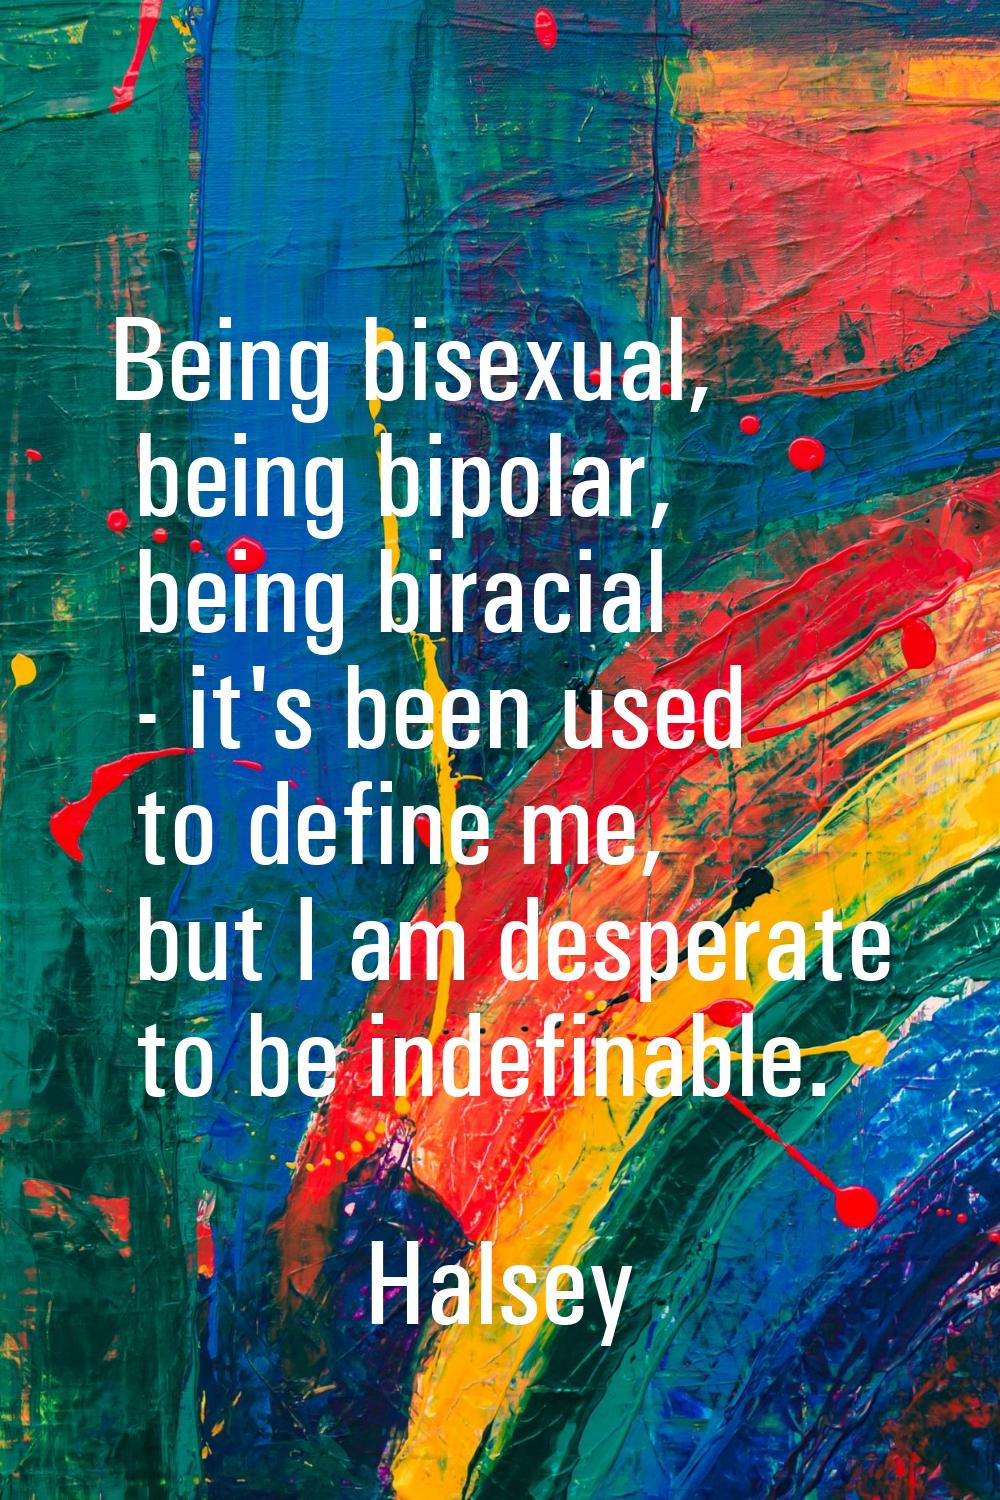 Being bisexual, being bipolar, being biracial - it's been used to define me, but I am desperate to 